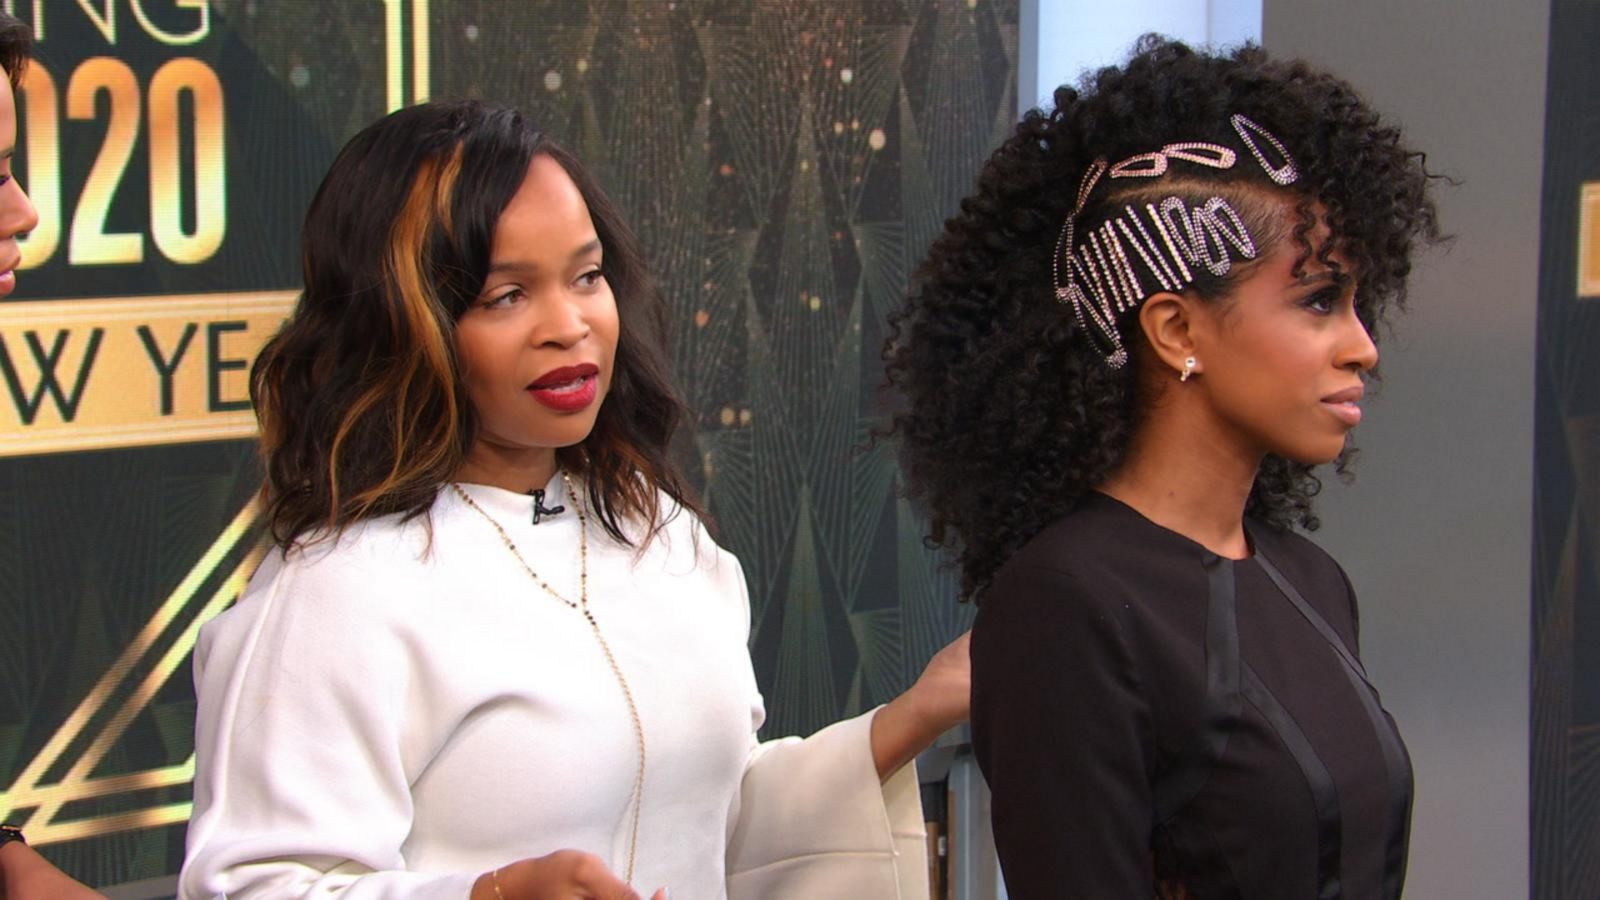 Ring in the new year with these top hair trends - Good Morning America